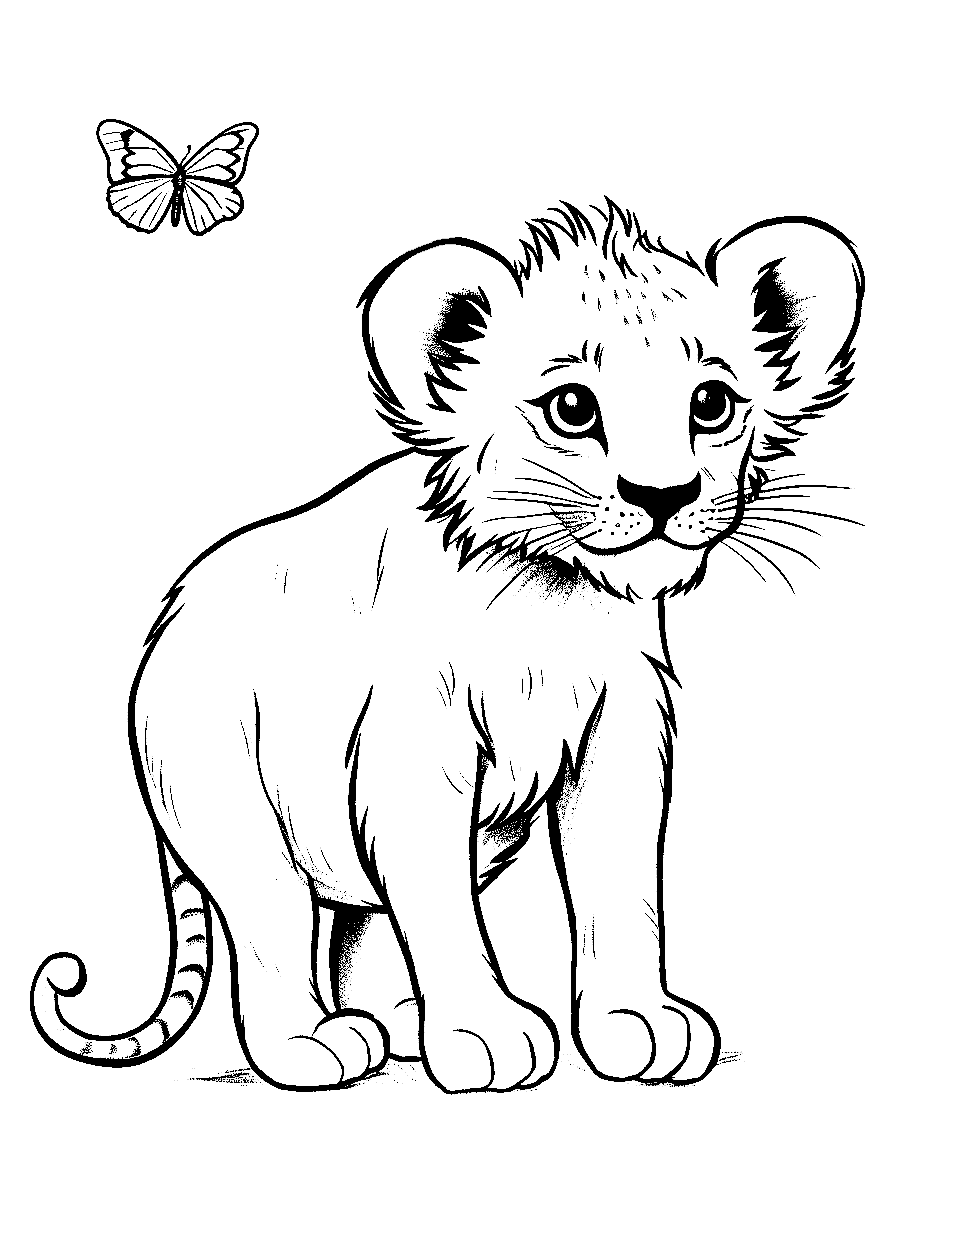 Cub's Friend Coloring Page - A lion cub and its friend the fluttering butterfly.